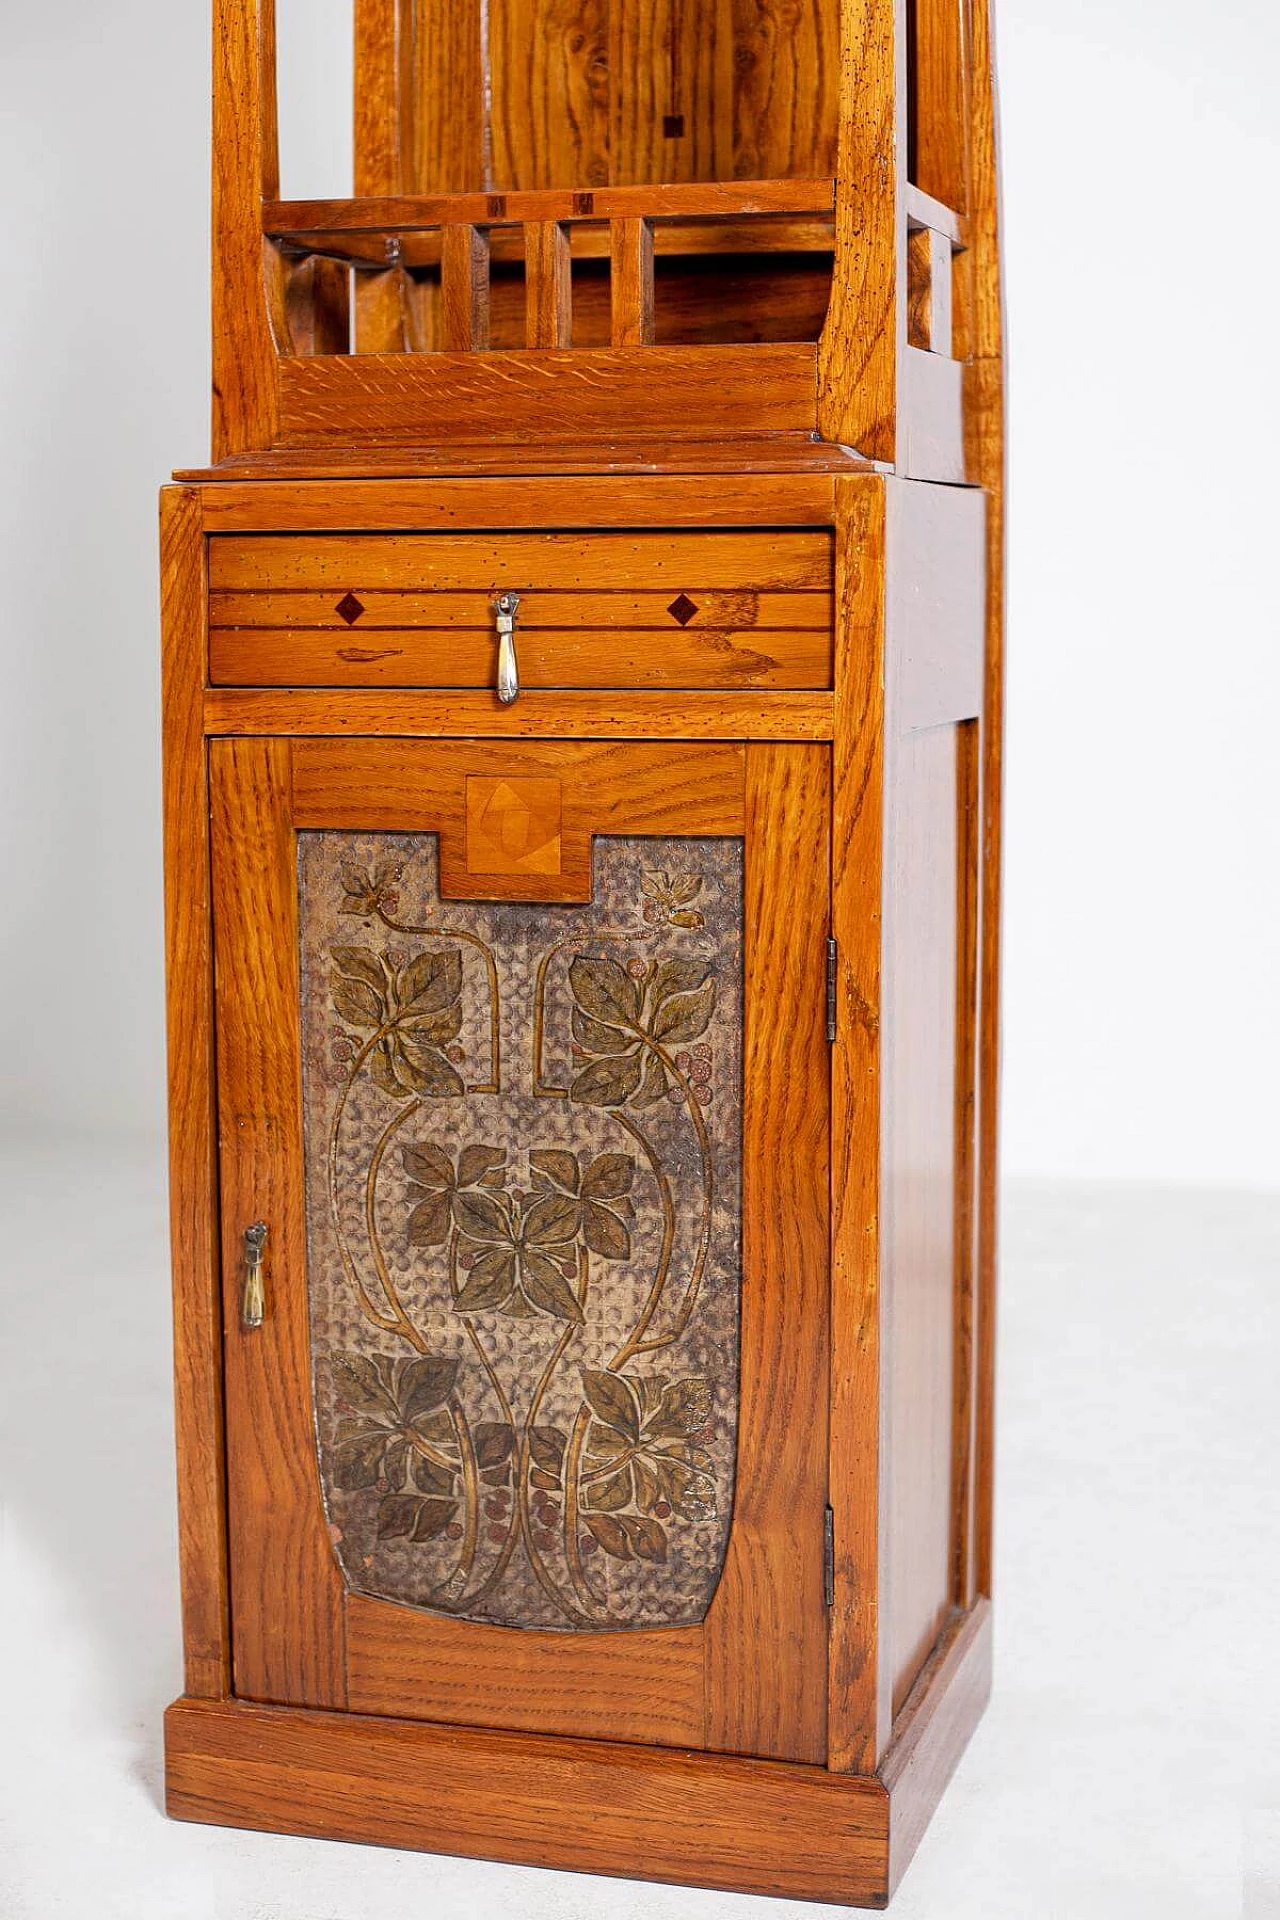 Carved wooden cabinet in Art Nouveau style, 20th century 1403428